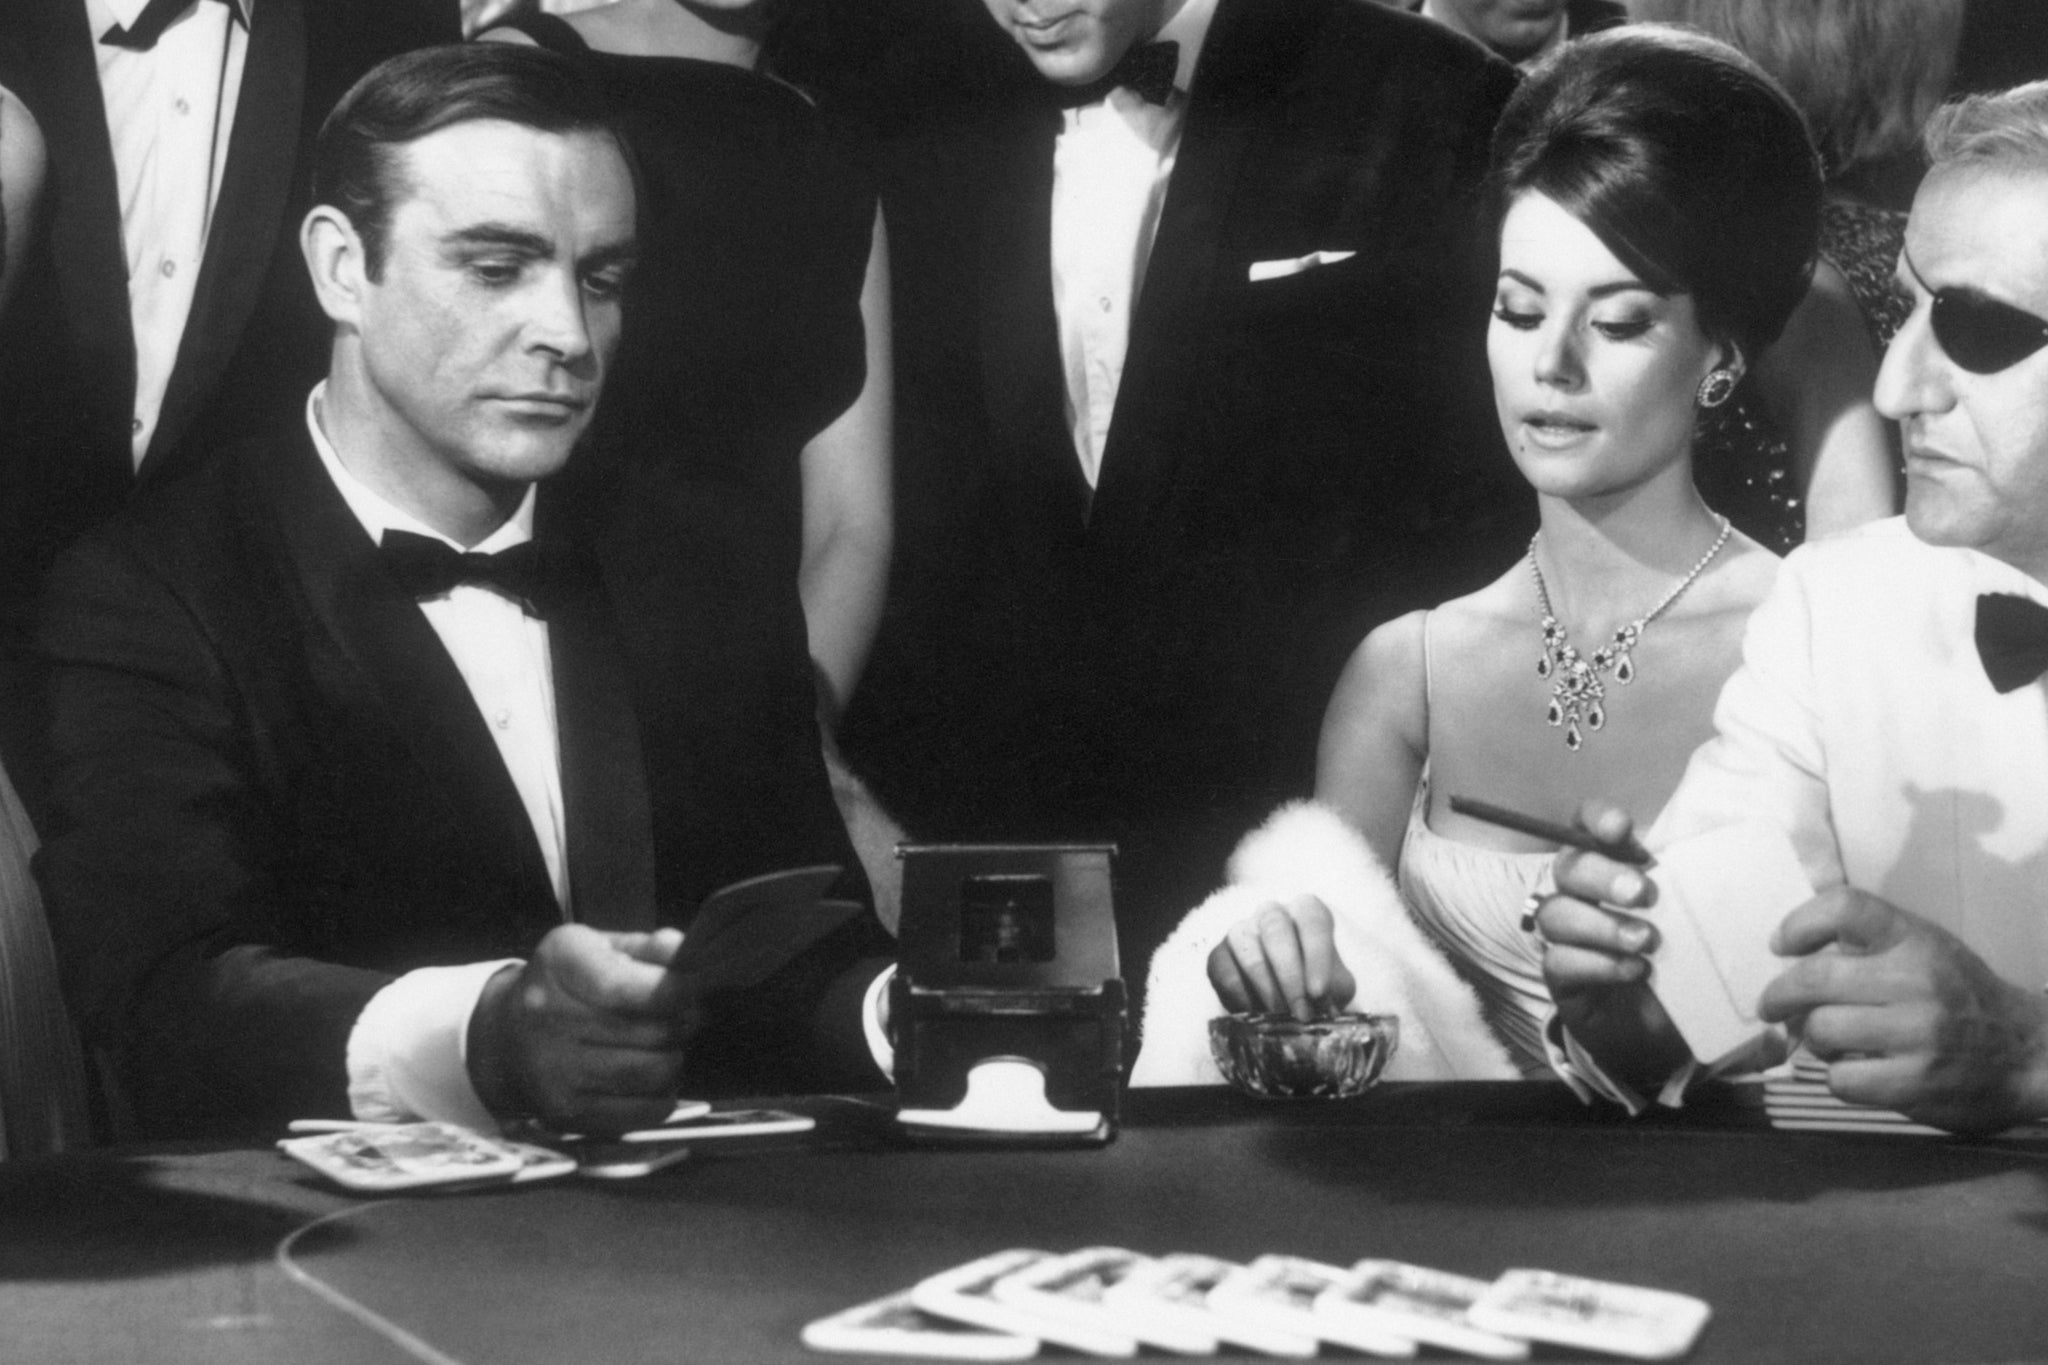 Sean Connery with Claudine Auger and Adolfo Celi in ‘Thunderball’, the film that kickstarted Bond merchandising